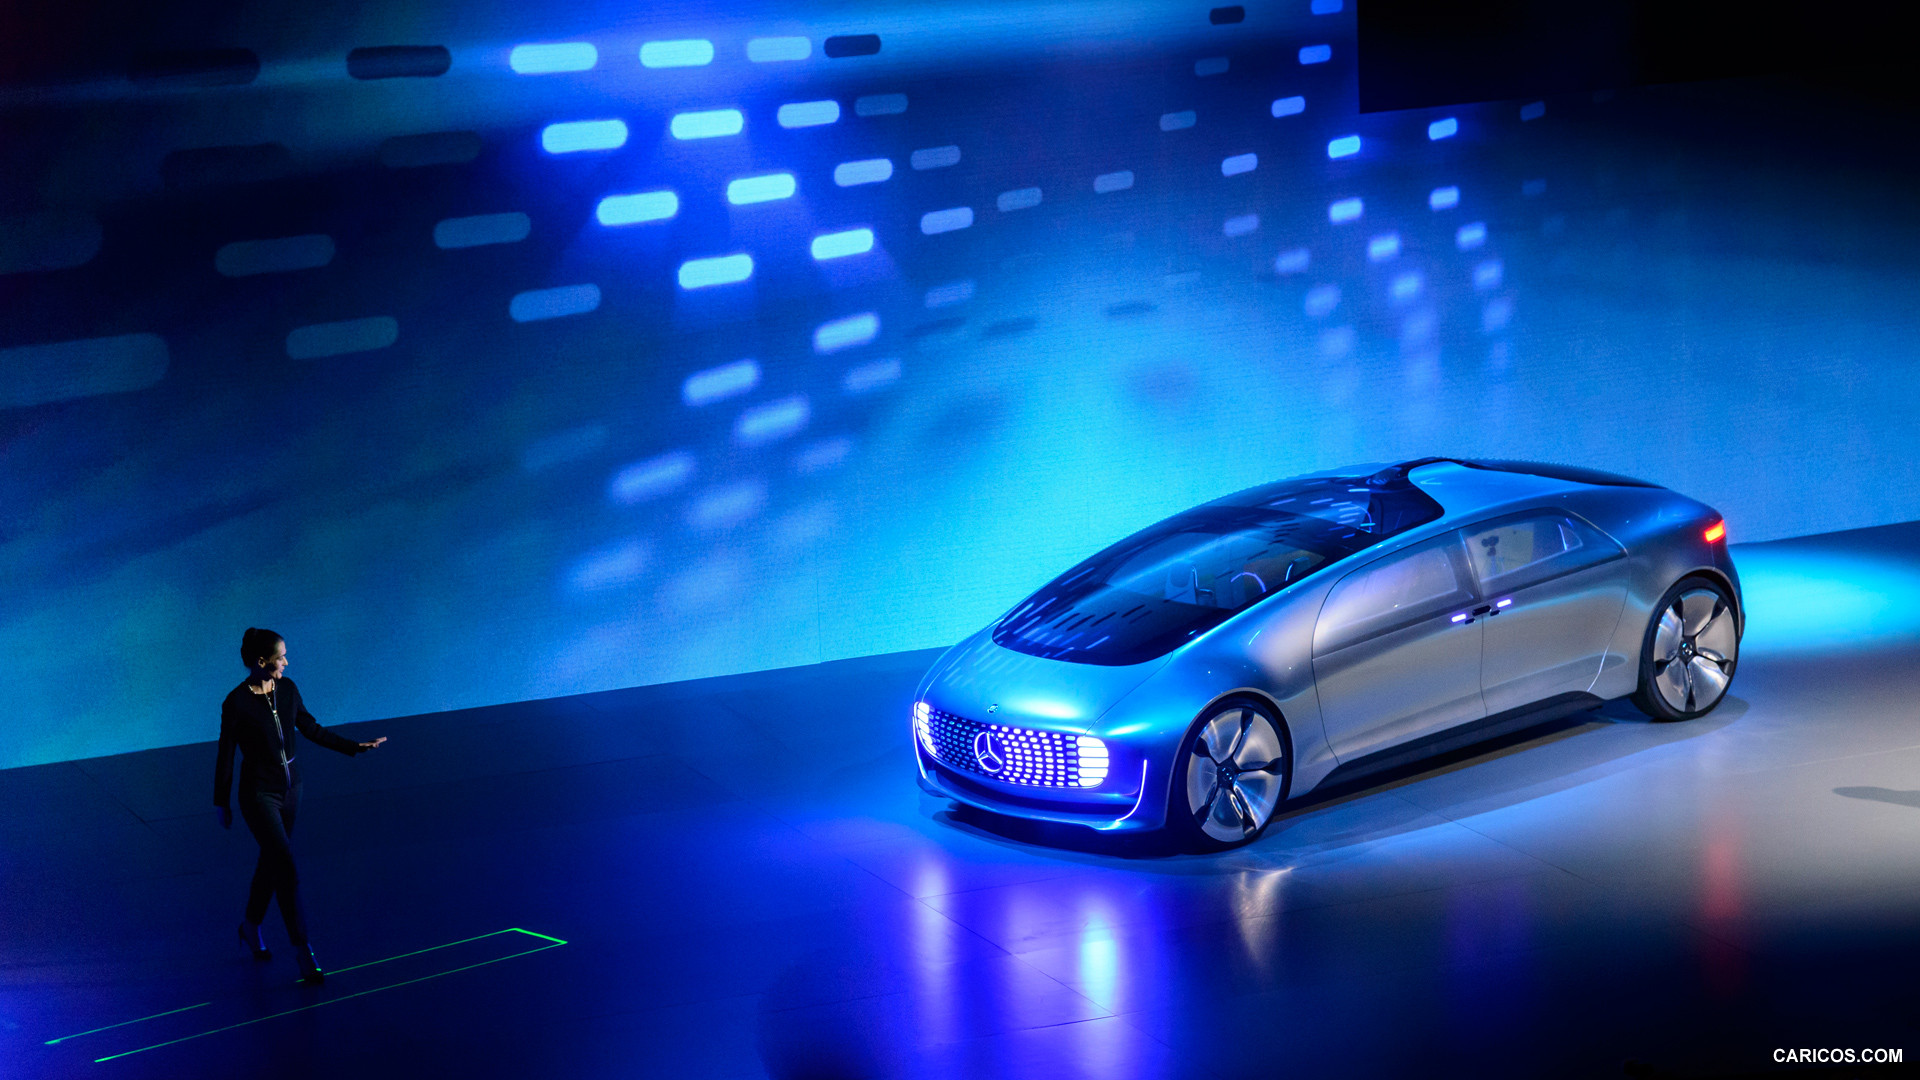 2015 Mercedes-Benz F 015 Luxury in Motion Concept at CES - Front, #80 of 92